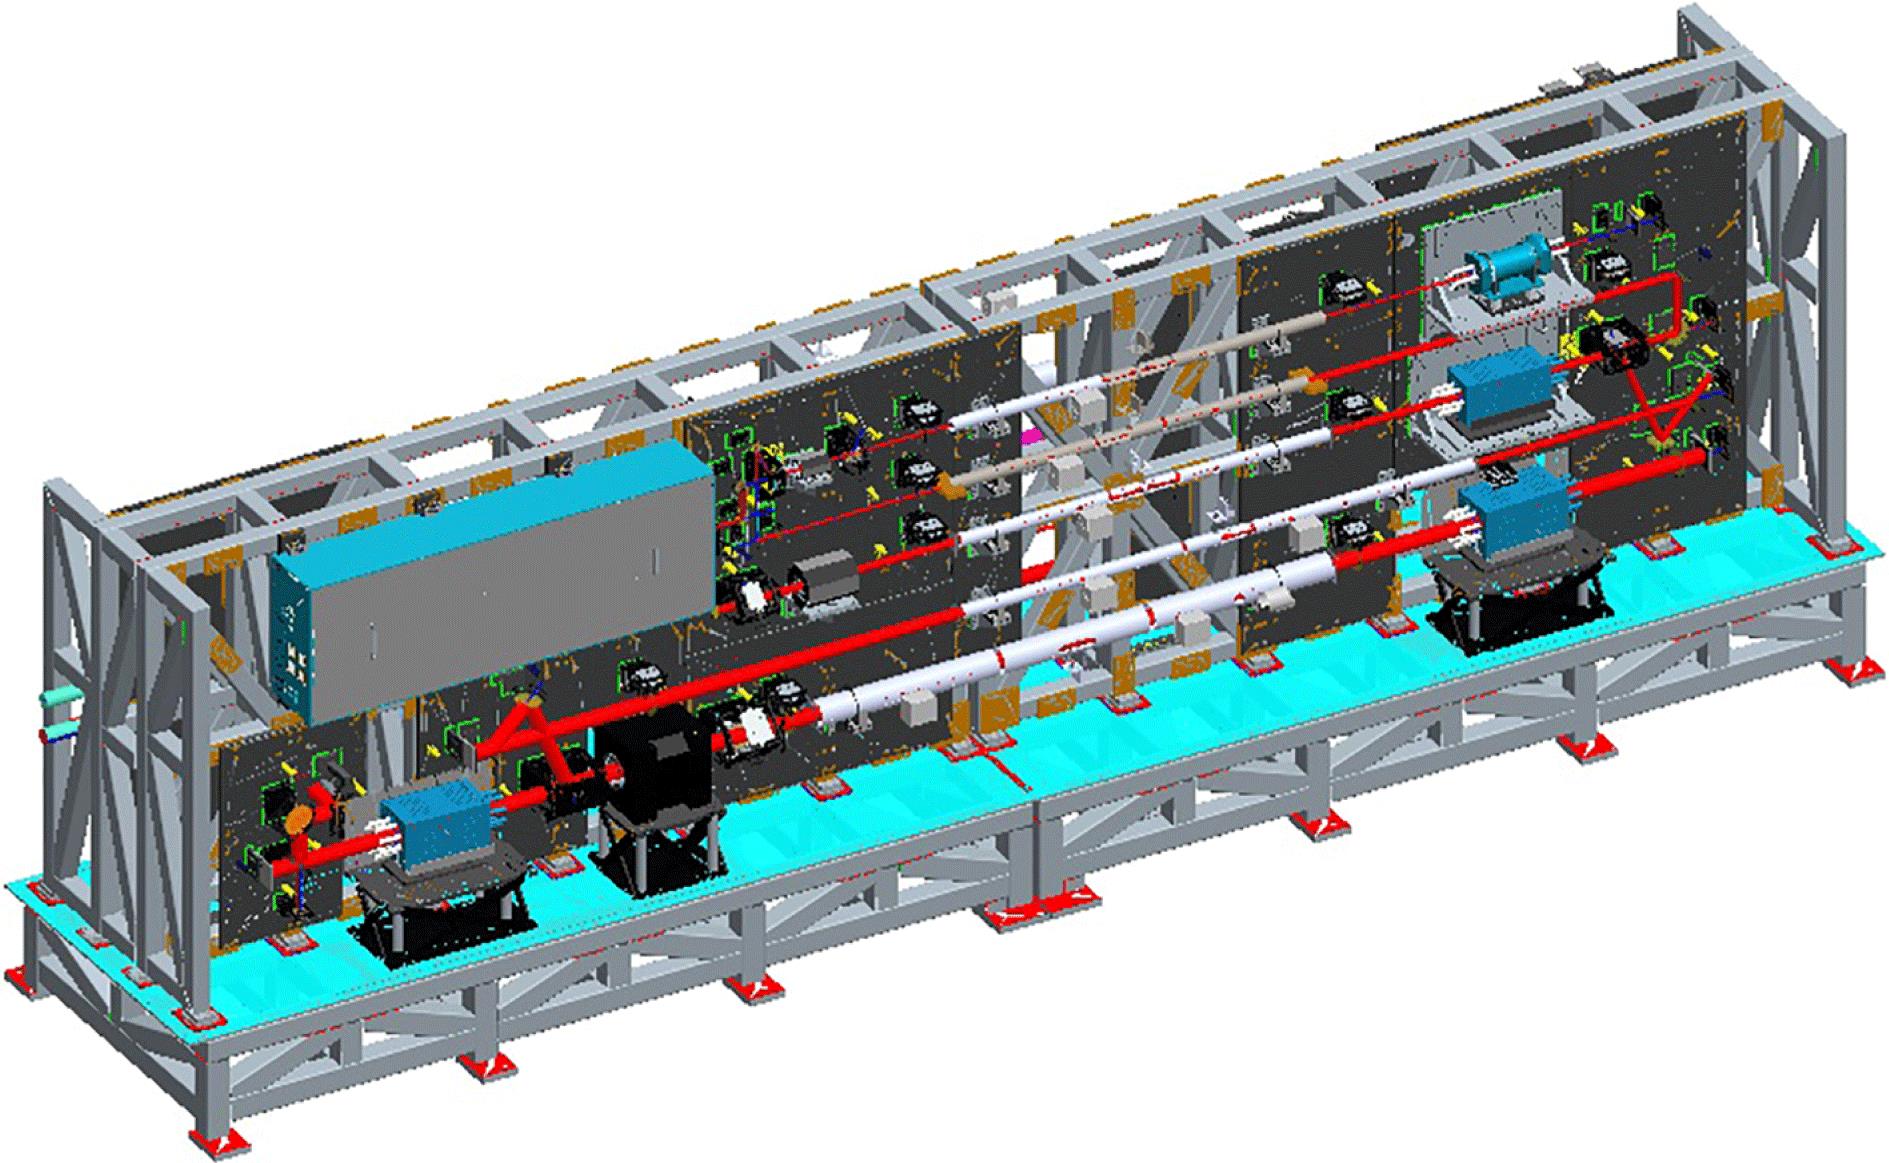 The 3D drawings of the main part of the 100-J-level laser system.